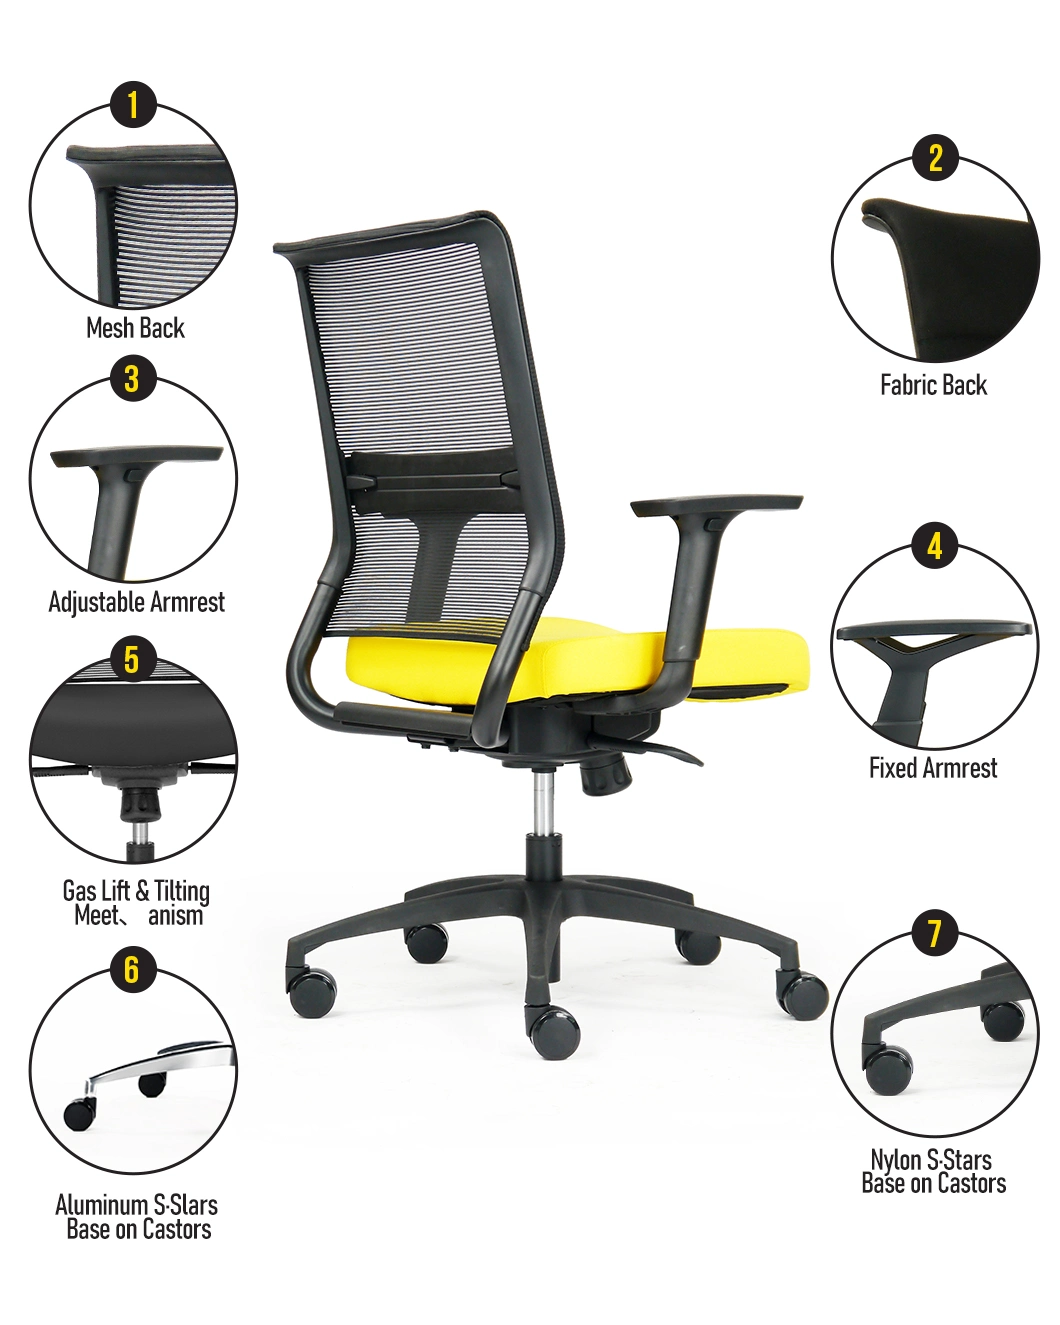 Chair Office Adjustable Lifting Armrest New Arrival Comfortable Office Chair High Back for Office or Home